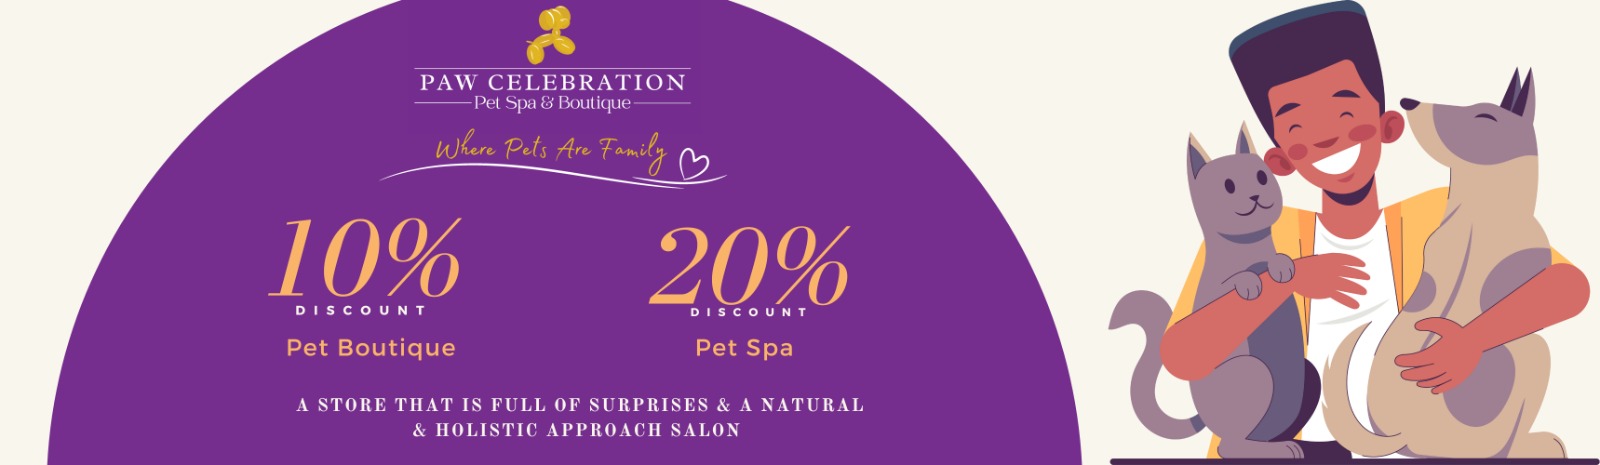 Paw Celebration Pet Grooming & Boutique